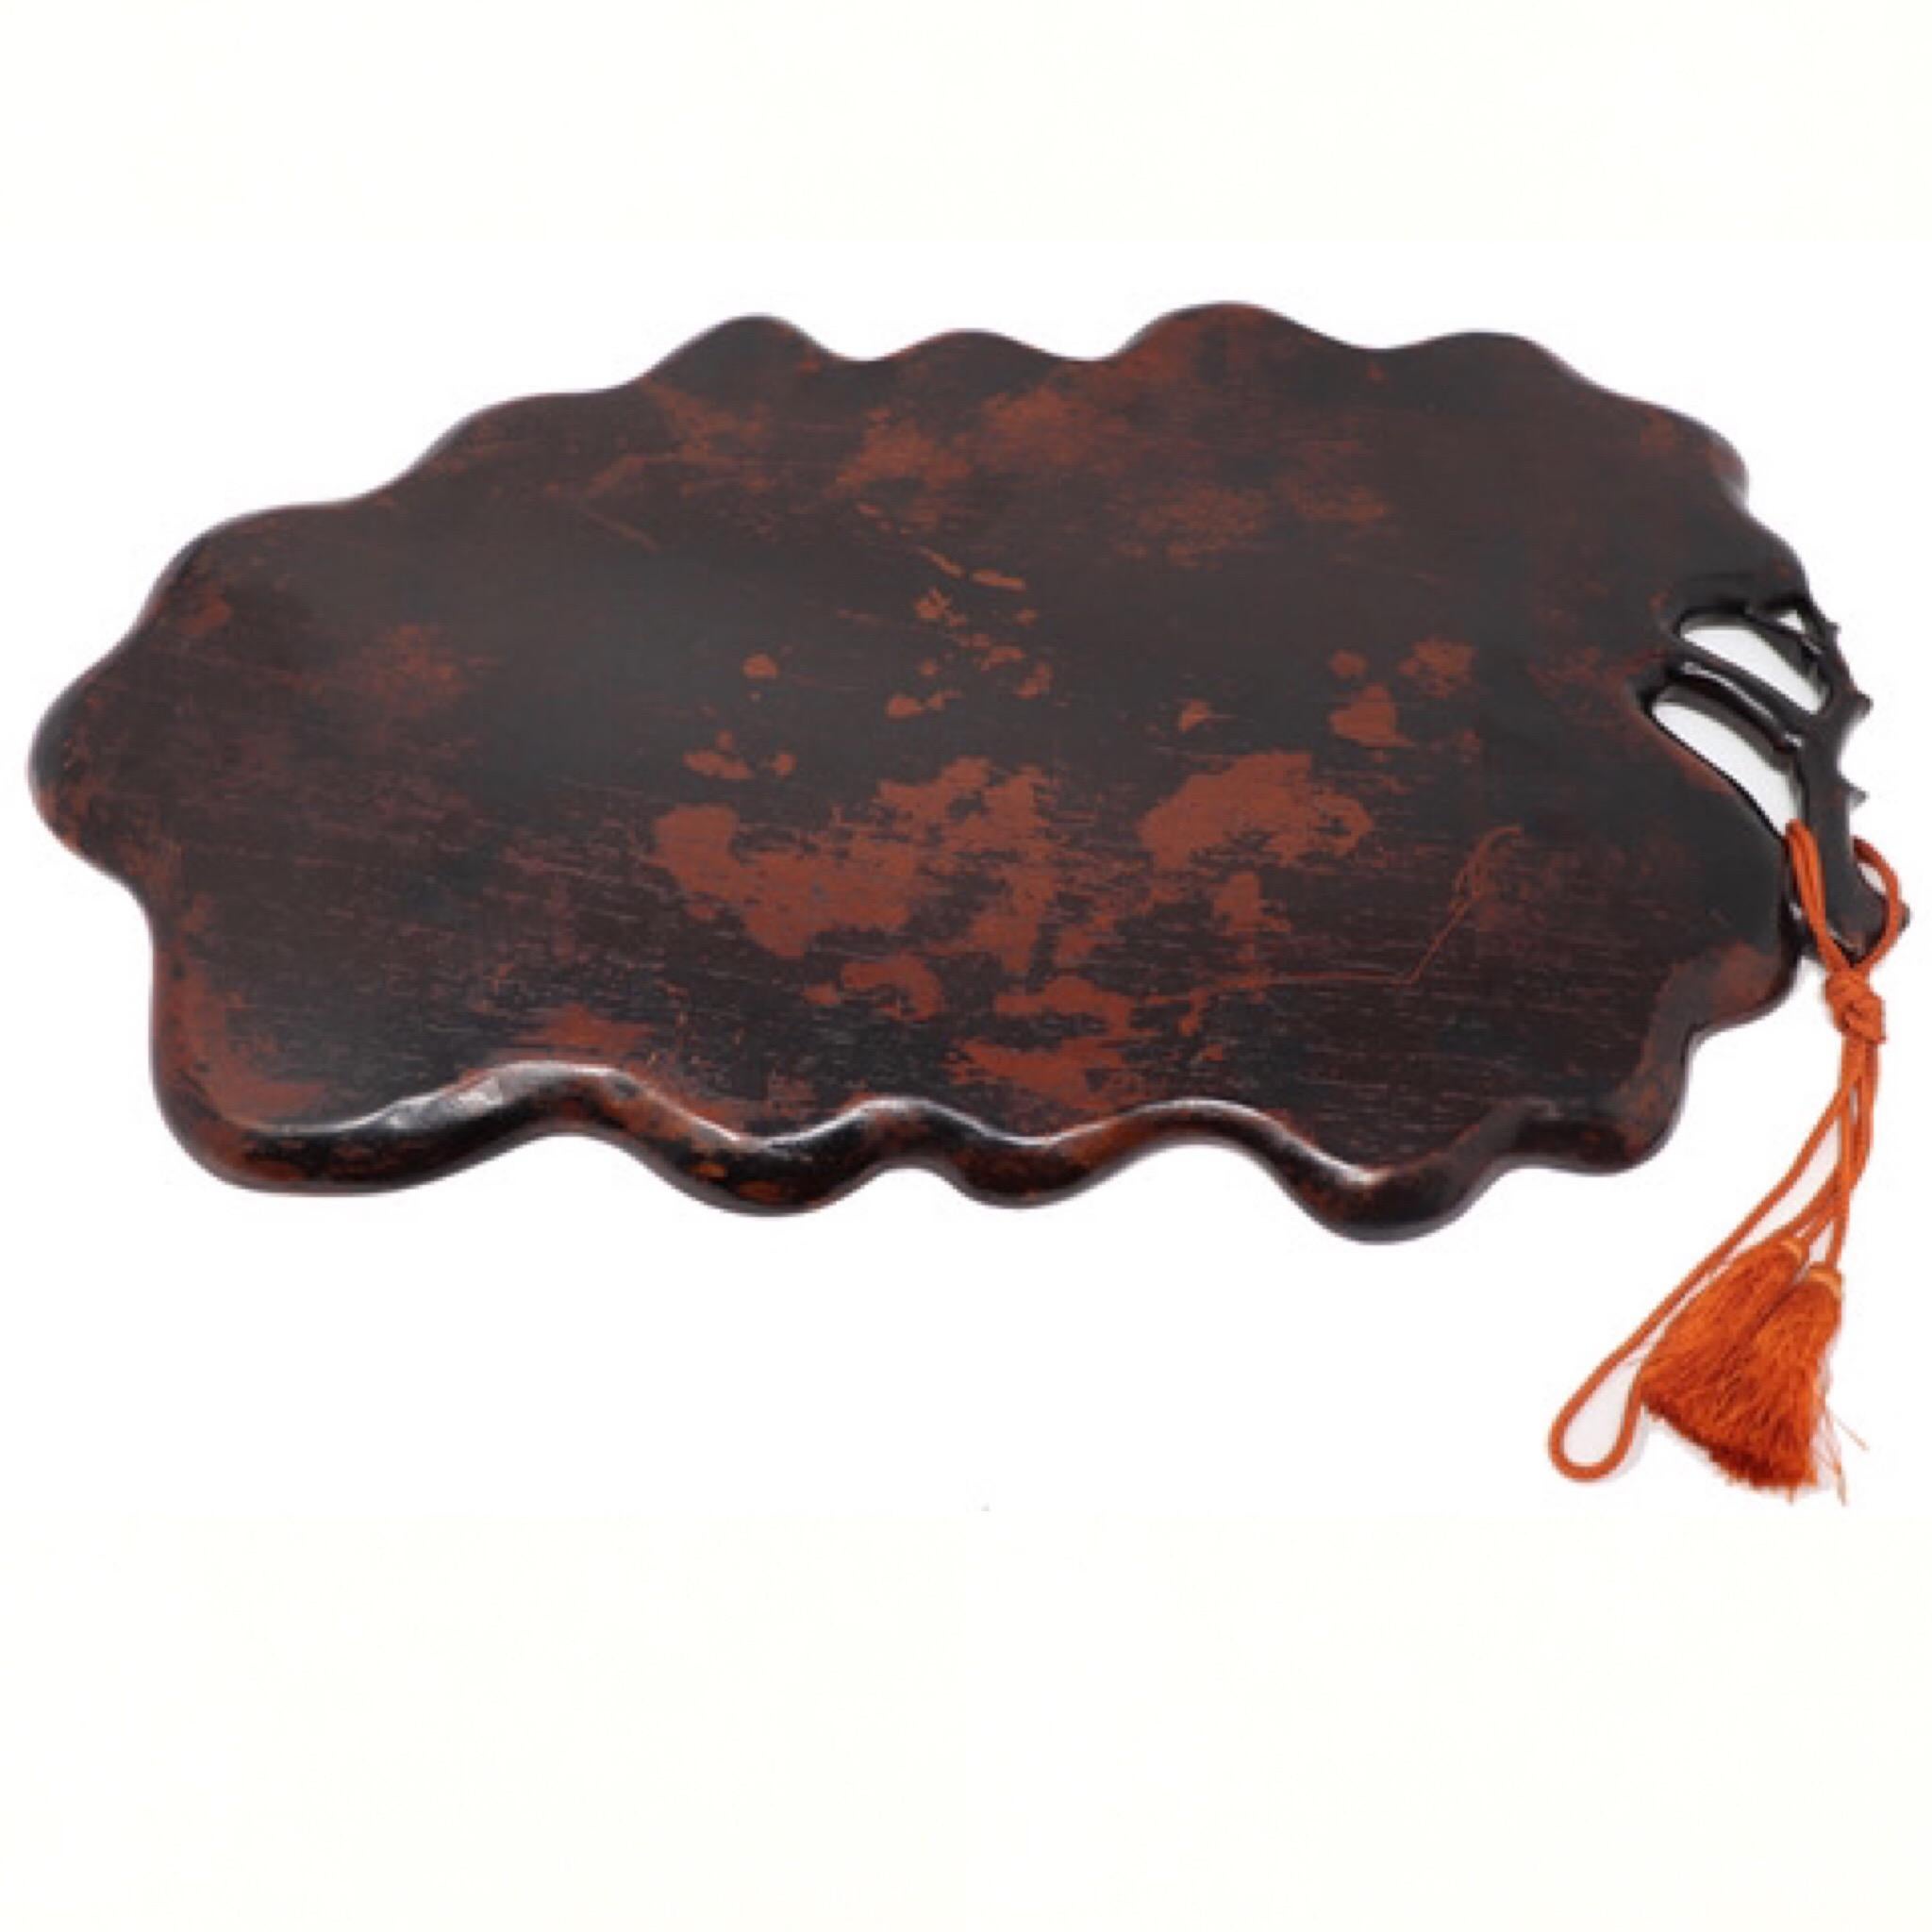 Japanese carved wood tea tray in the shape of a simple large flat leaf, carved from one solid piece of kiri (Paulownia tomentosa) covered in a rich reddish translucent lacquer in several coats, the form with curled up edges with the tip of the leaf